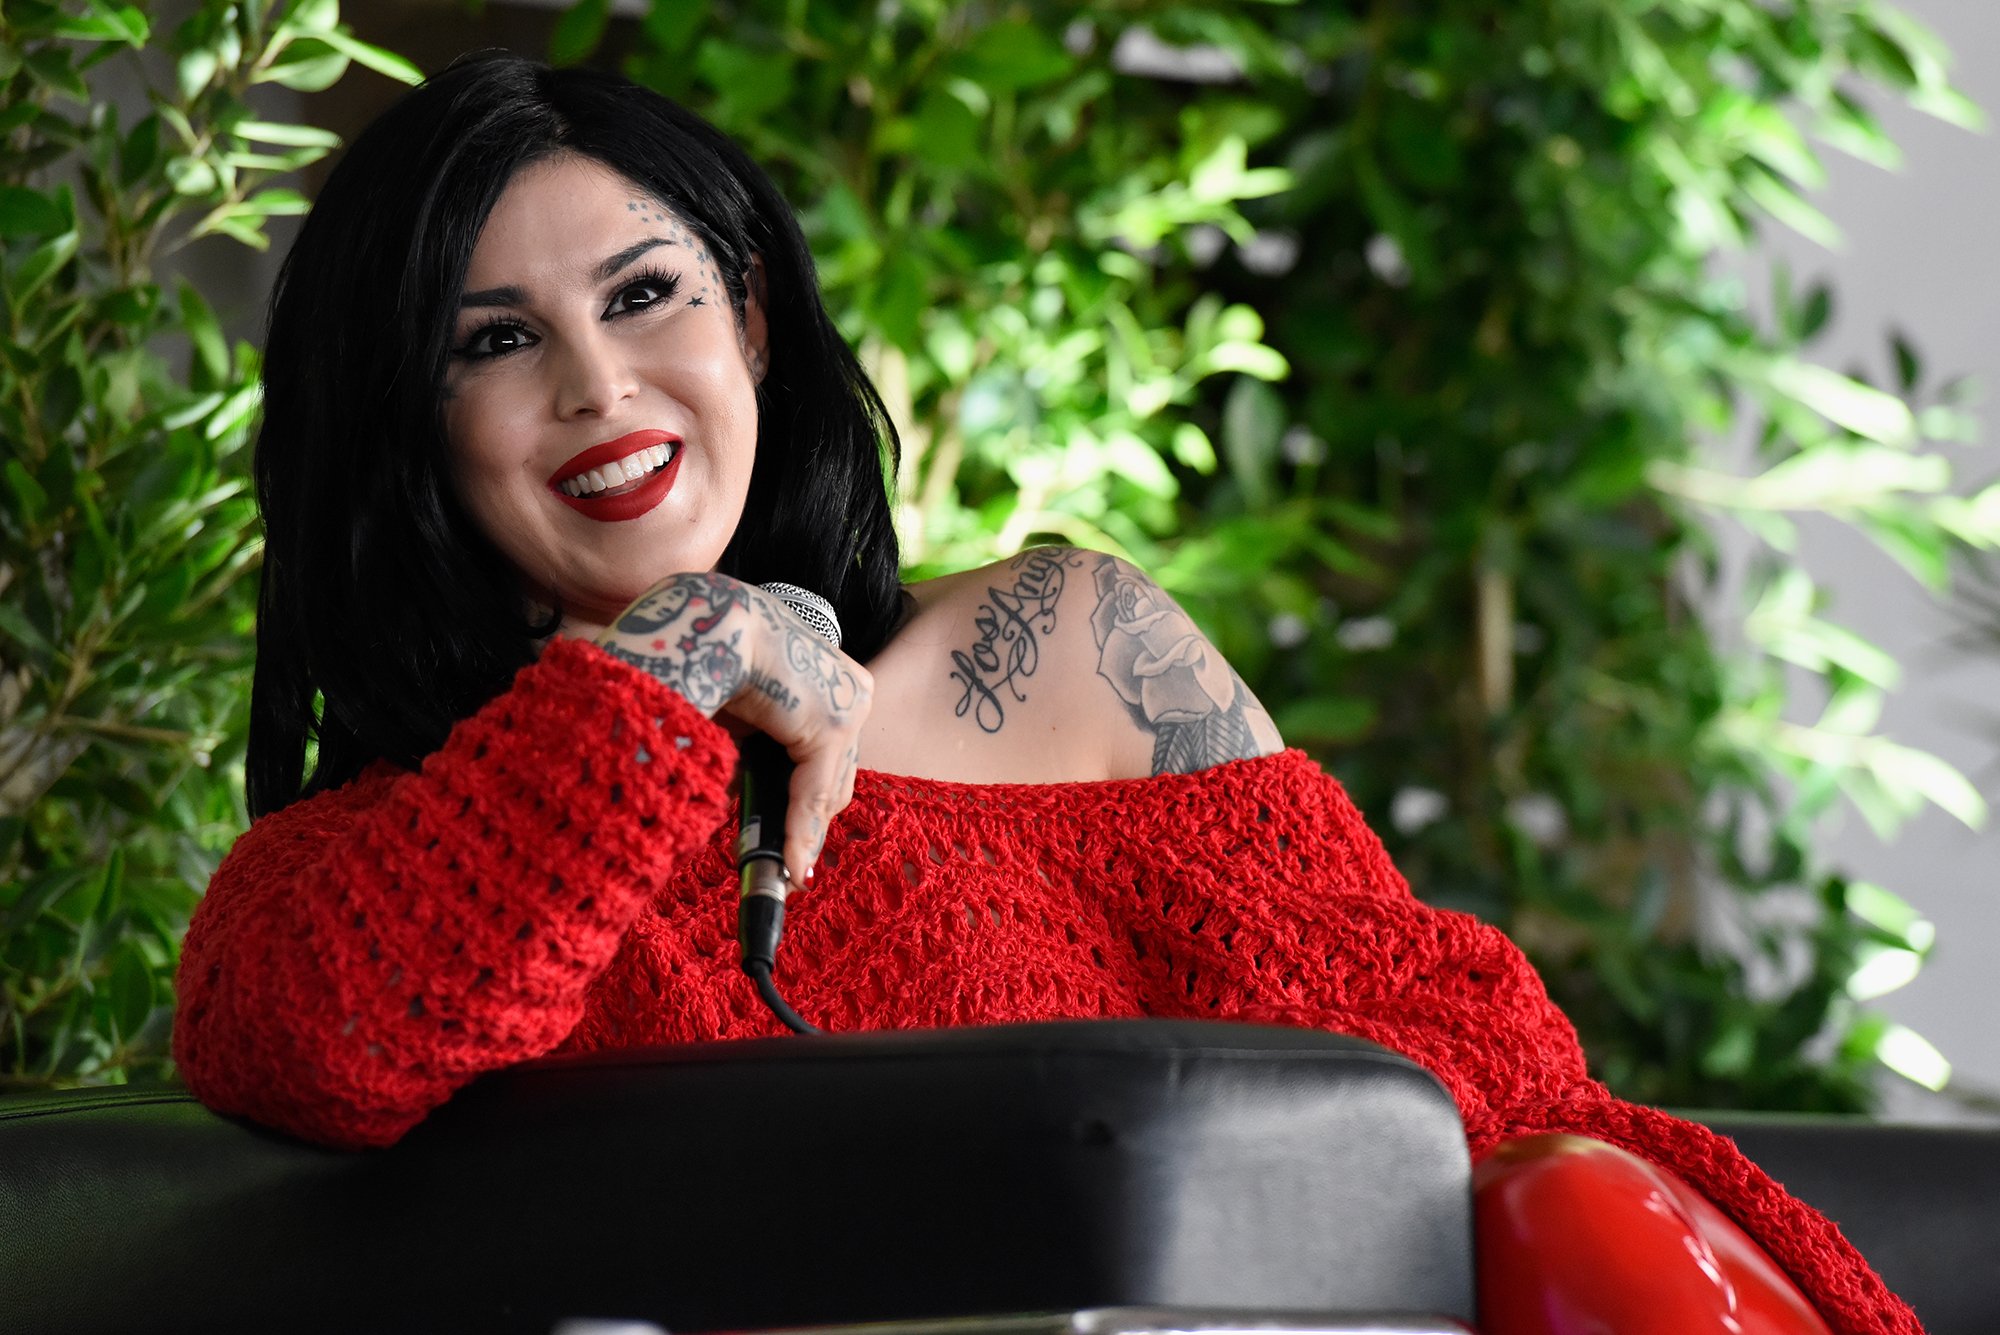 Kat Von D and Leafar Celebrate Their Marriage at Wedding Party